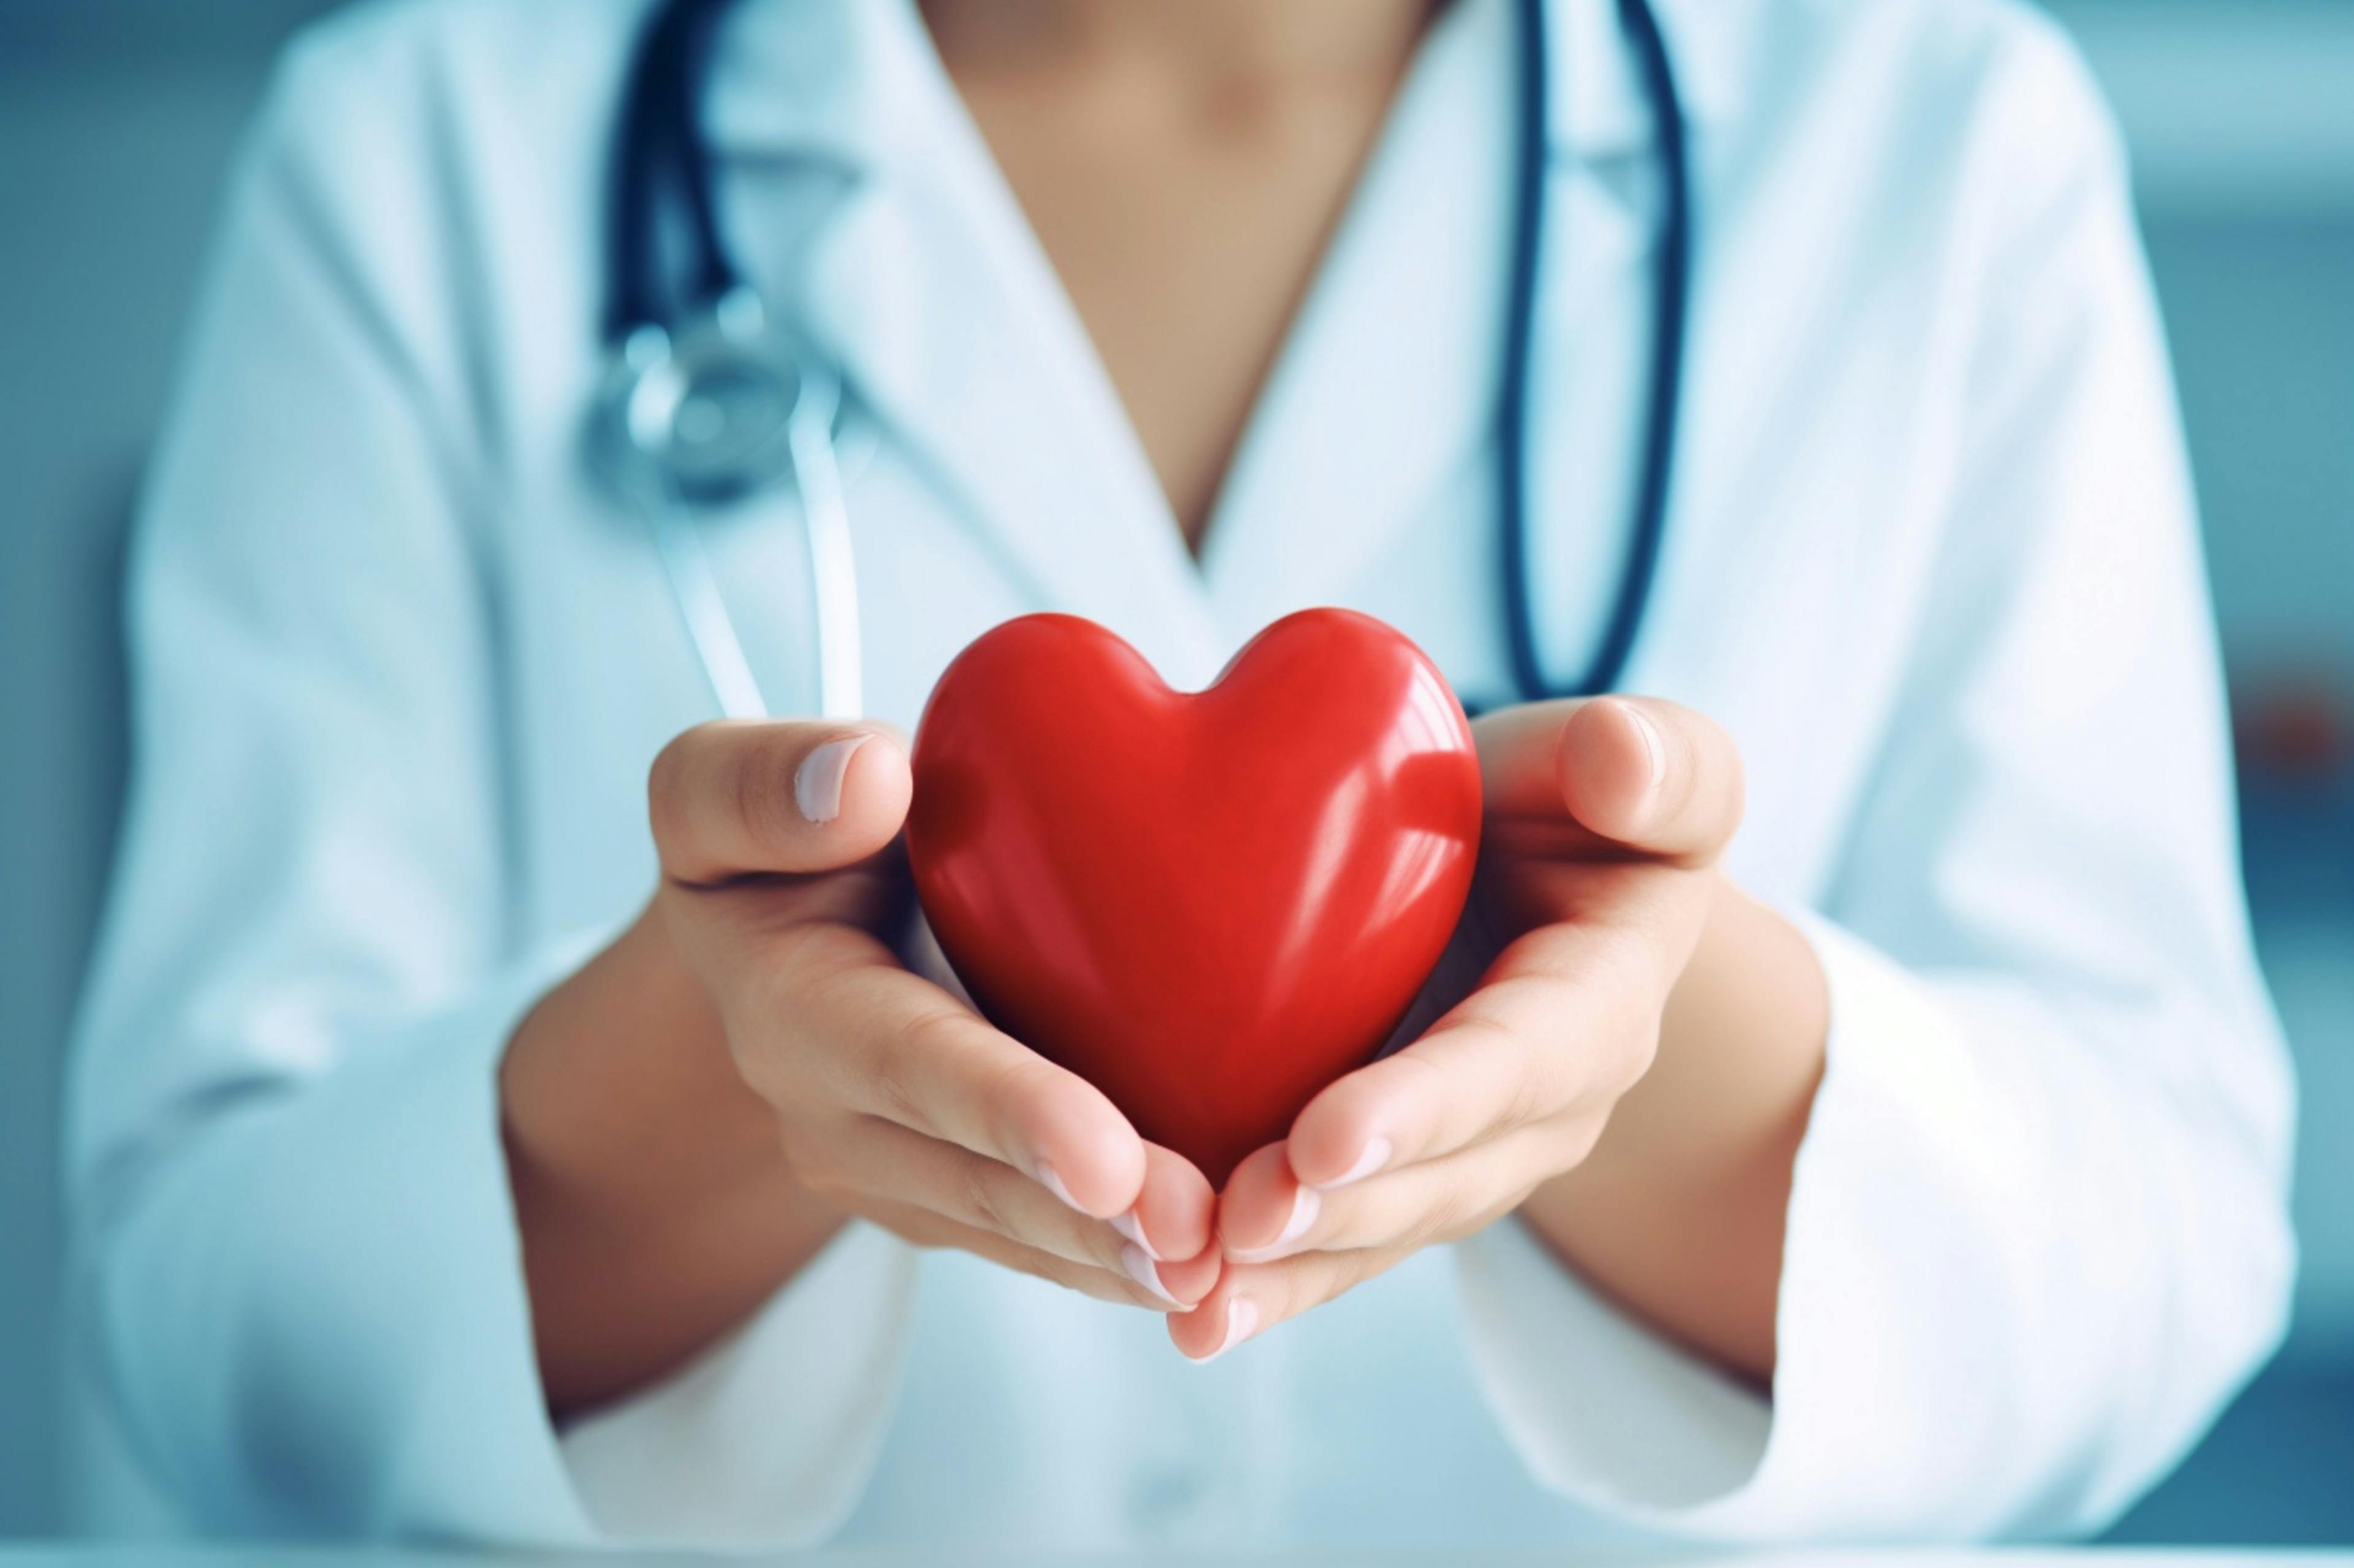 Cardiovascular Care Inequities Lead to Worse Outcomes for Women With Atrial Fibrillation